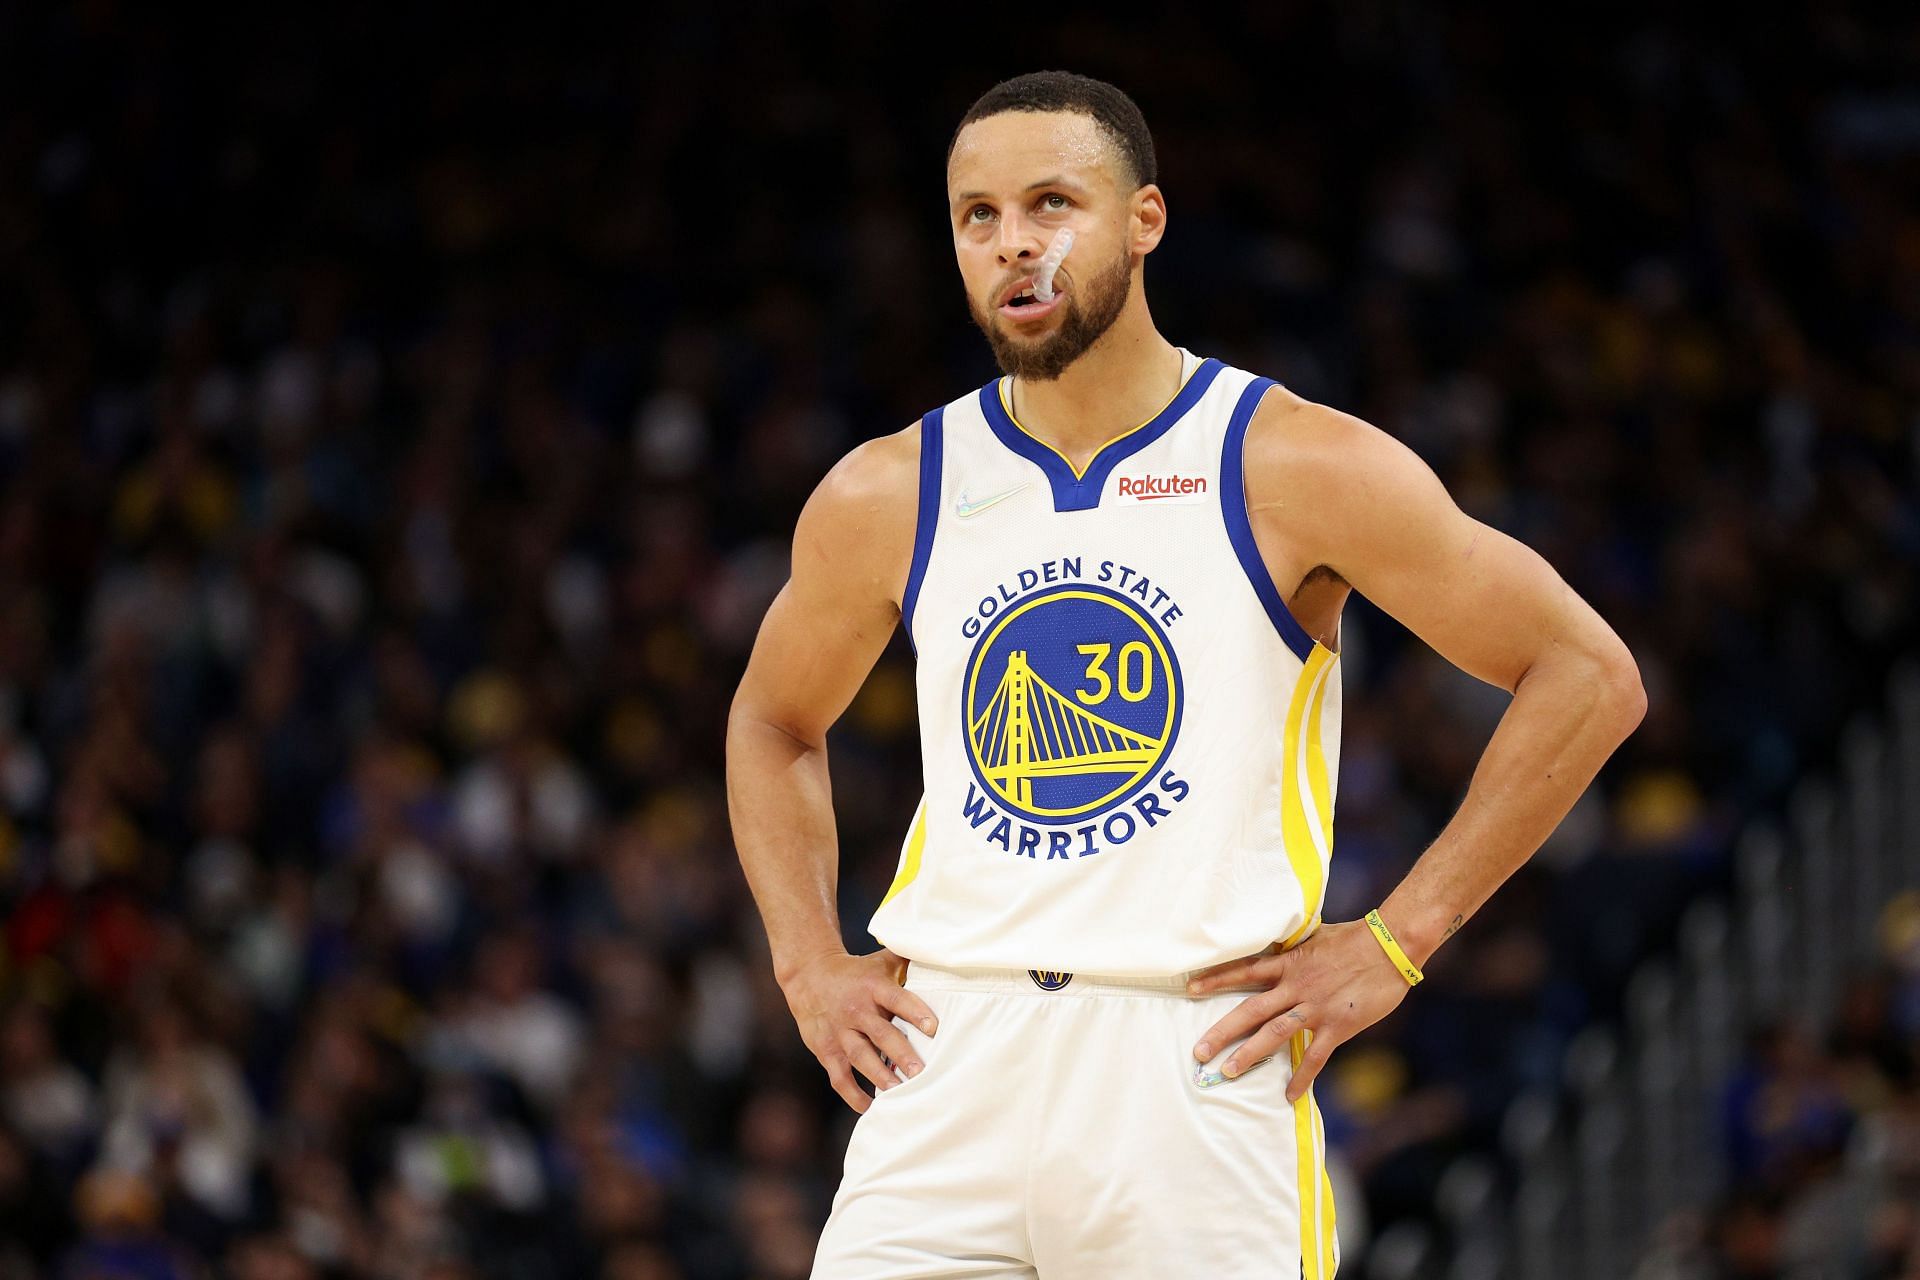 Steph Curry of the Golden State Warriors in the Western Conference semifinals